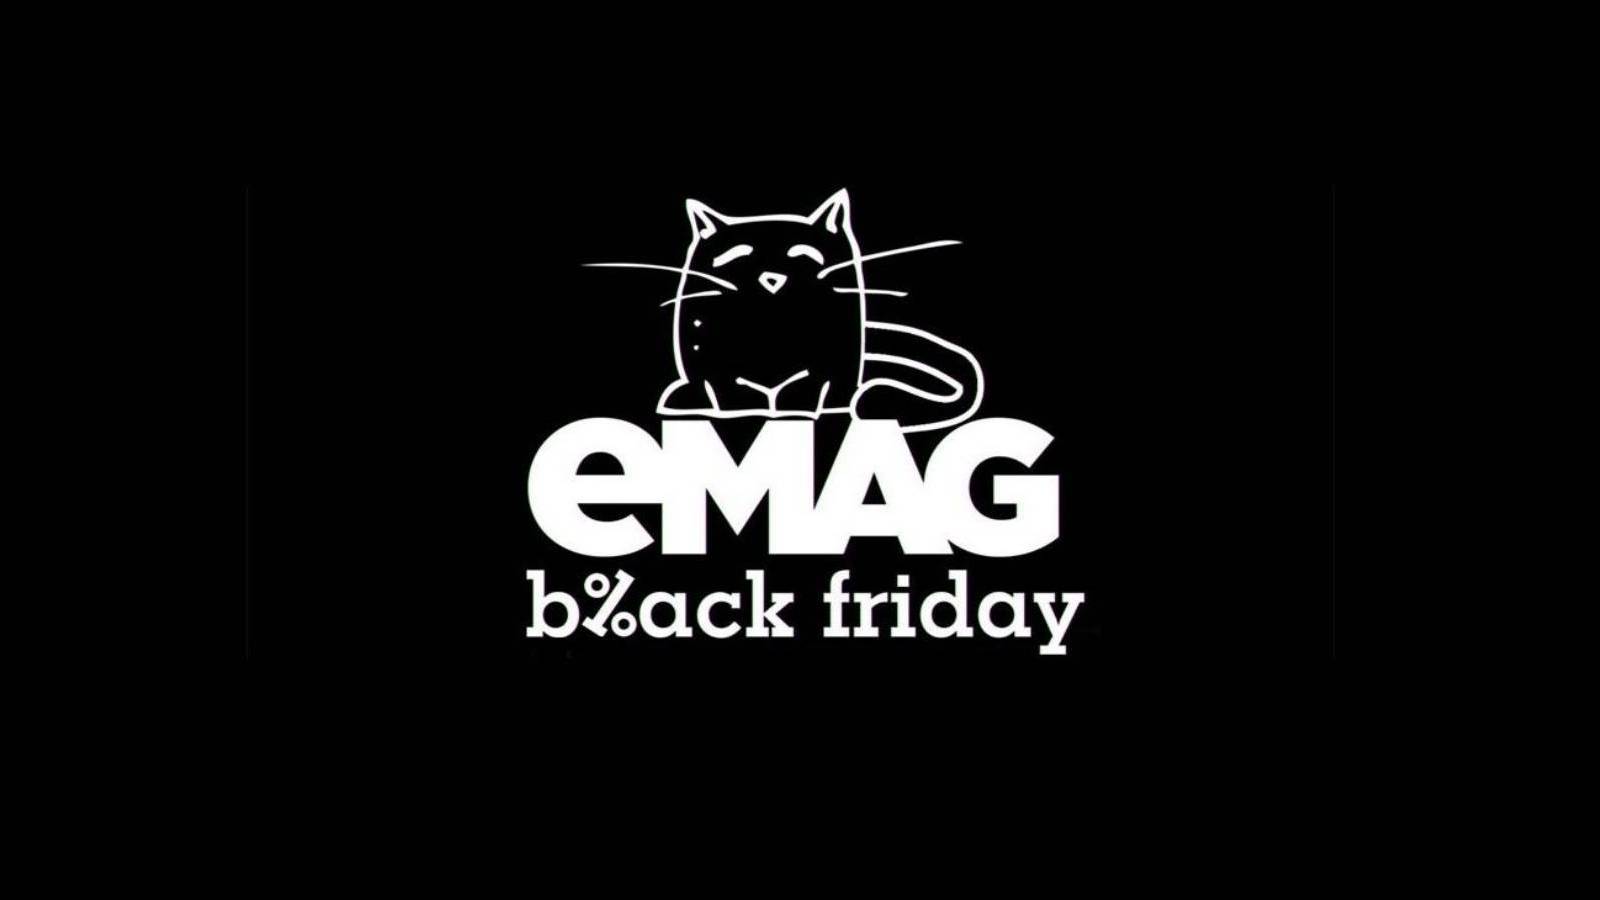 How long does BLACK FRIDAY last at eMAG